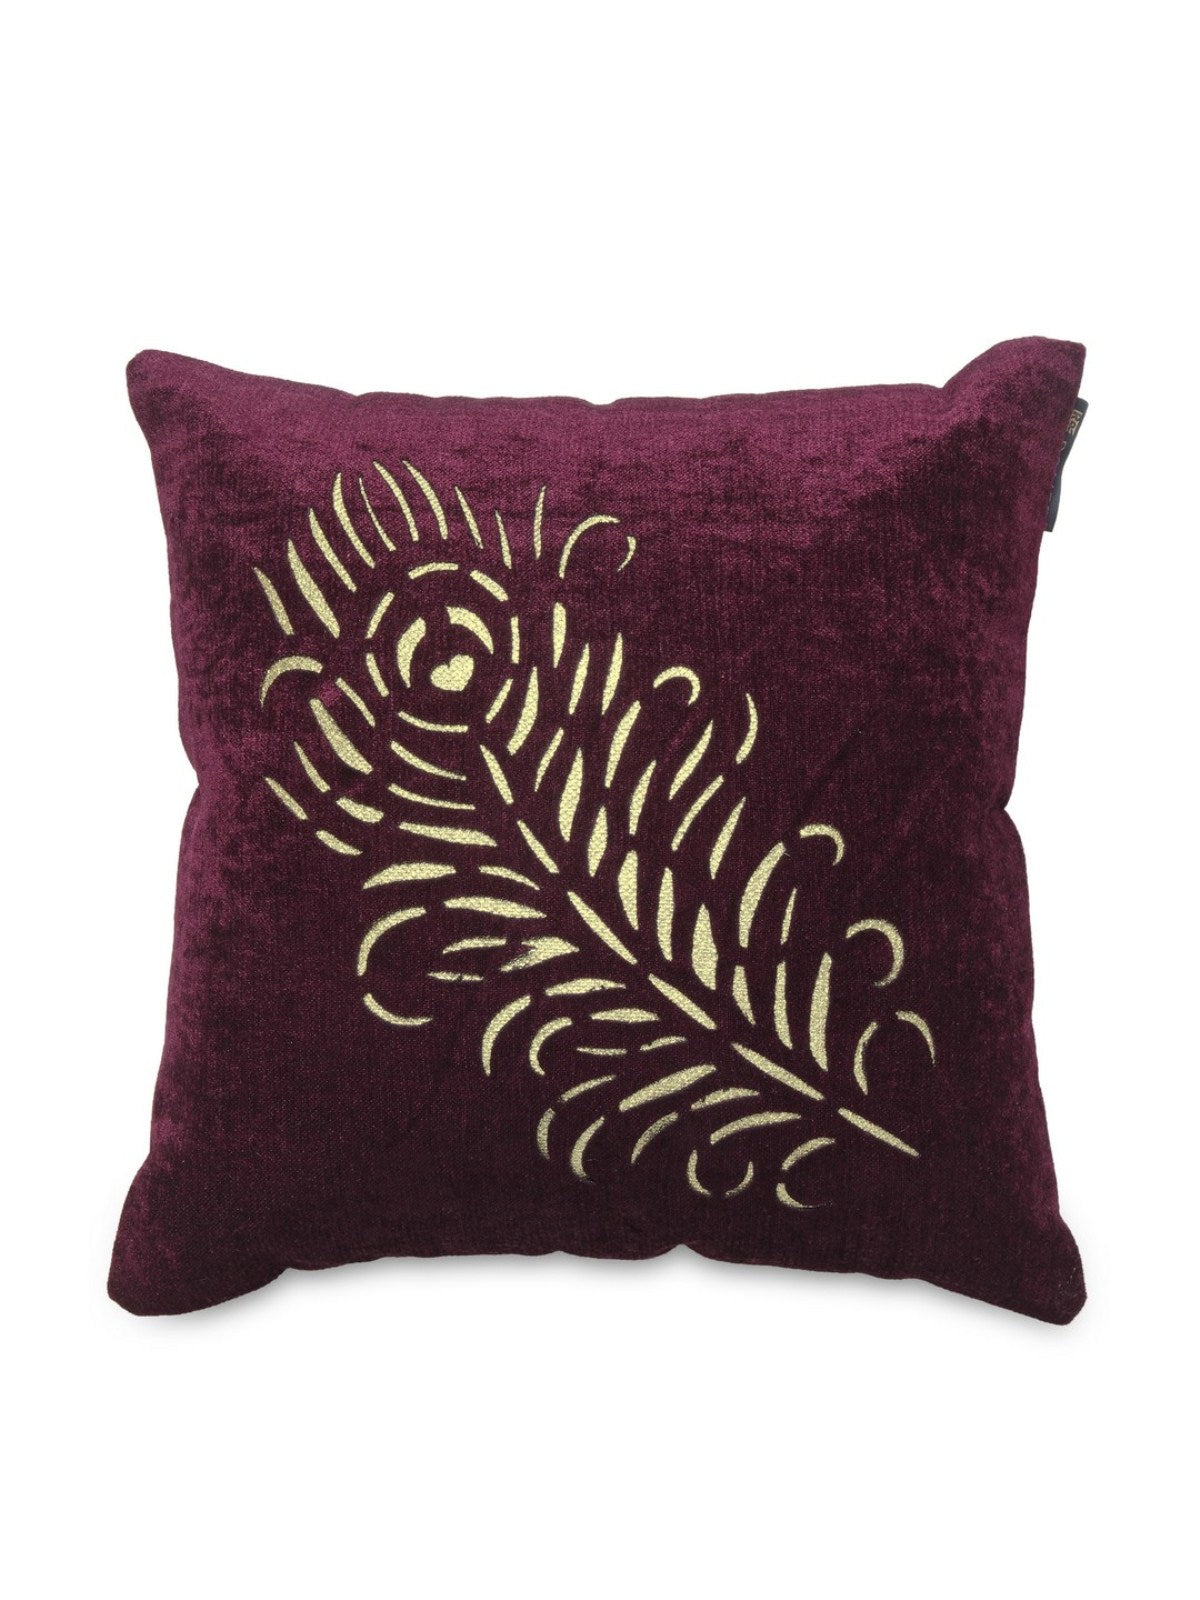 Peacock Feather Cut Designer Velvet Cushion Covers 16 inch x 16 inch, Set of 5 - Purple